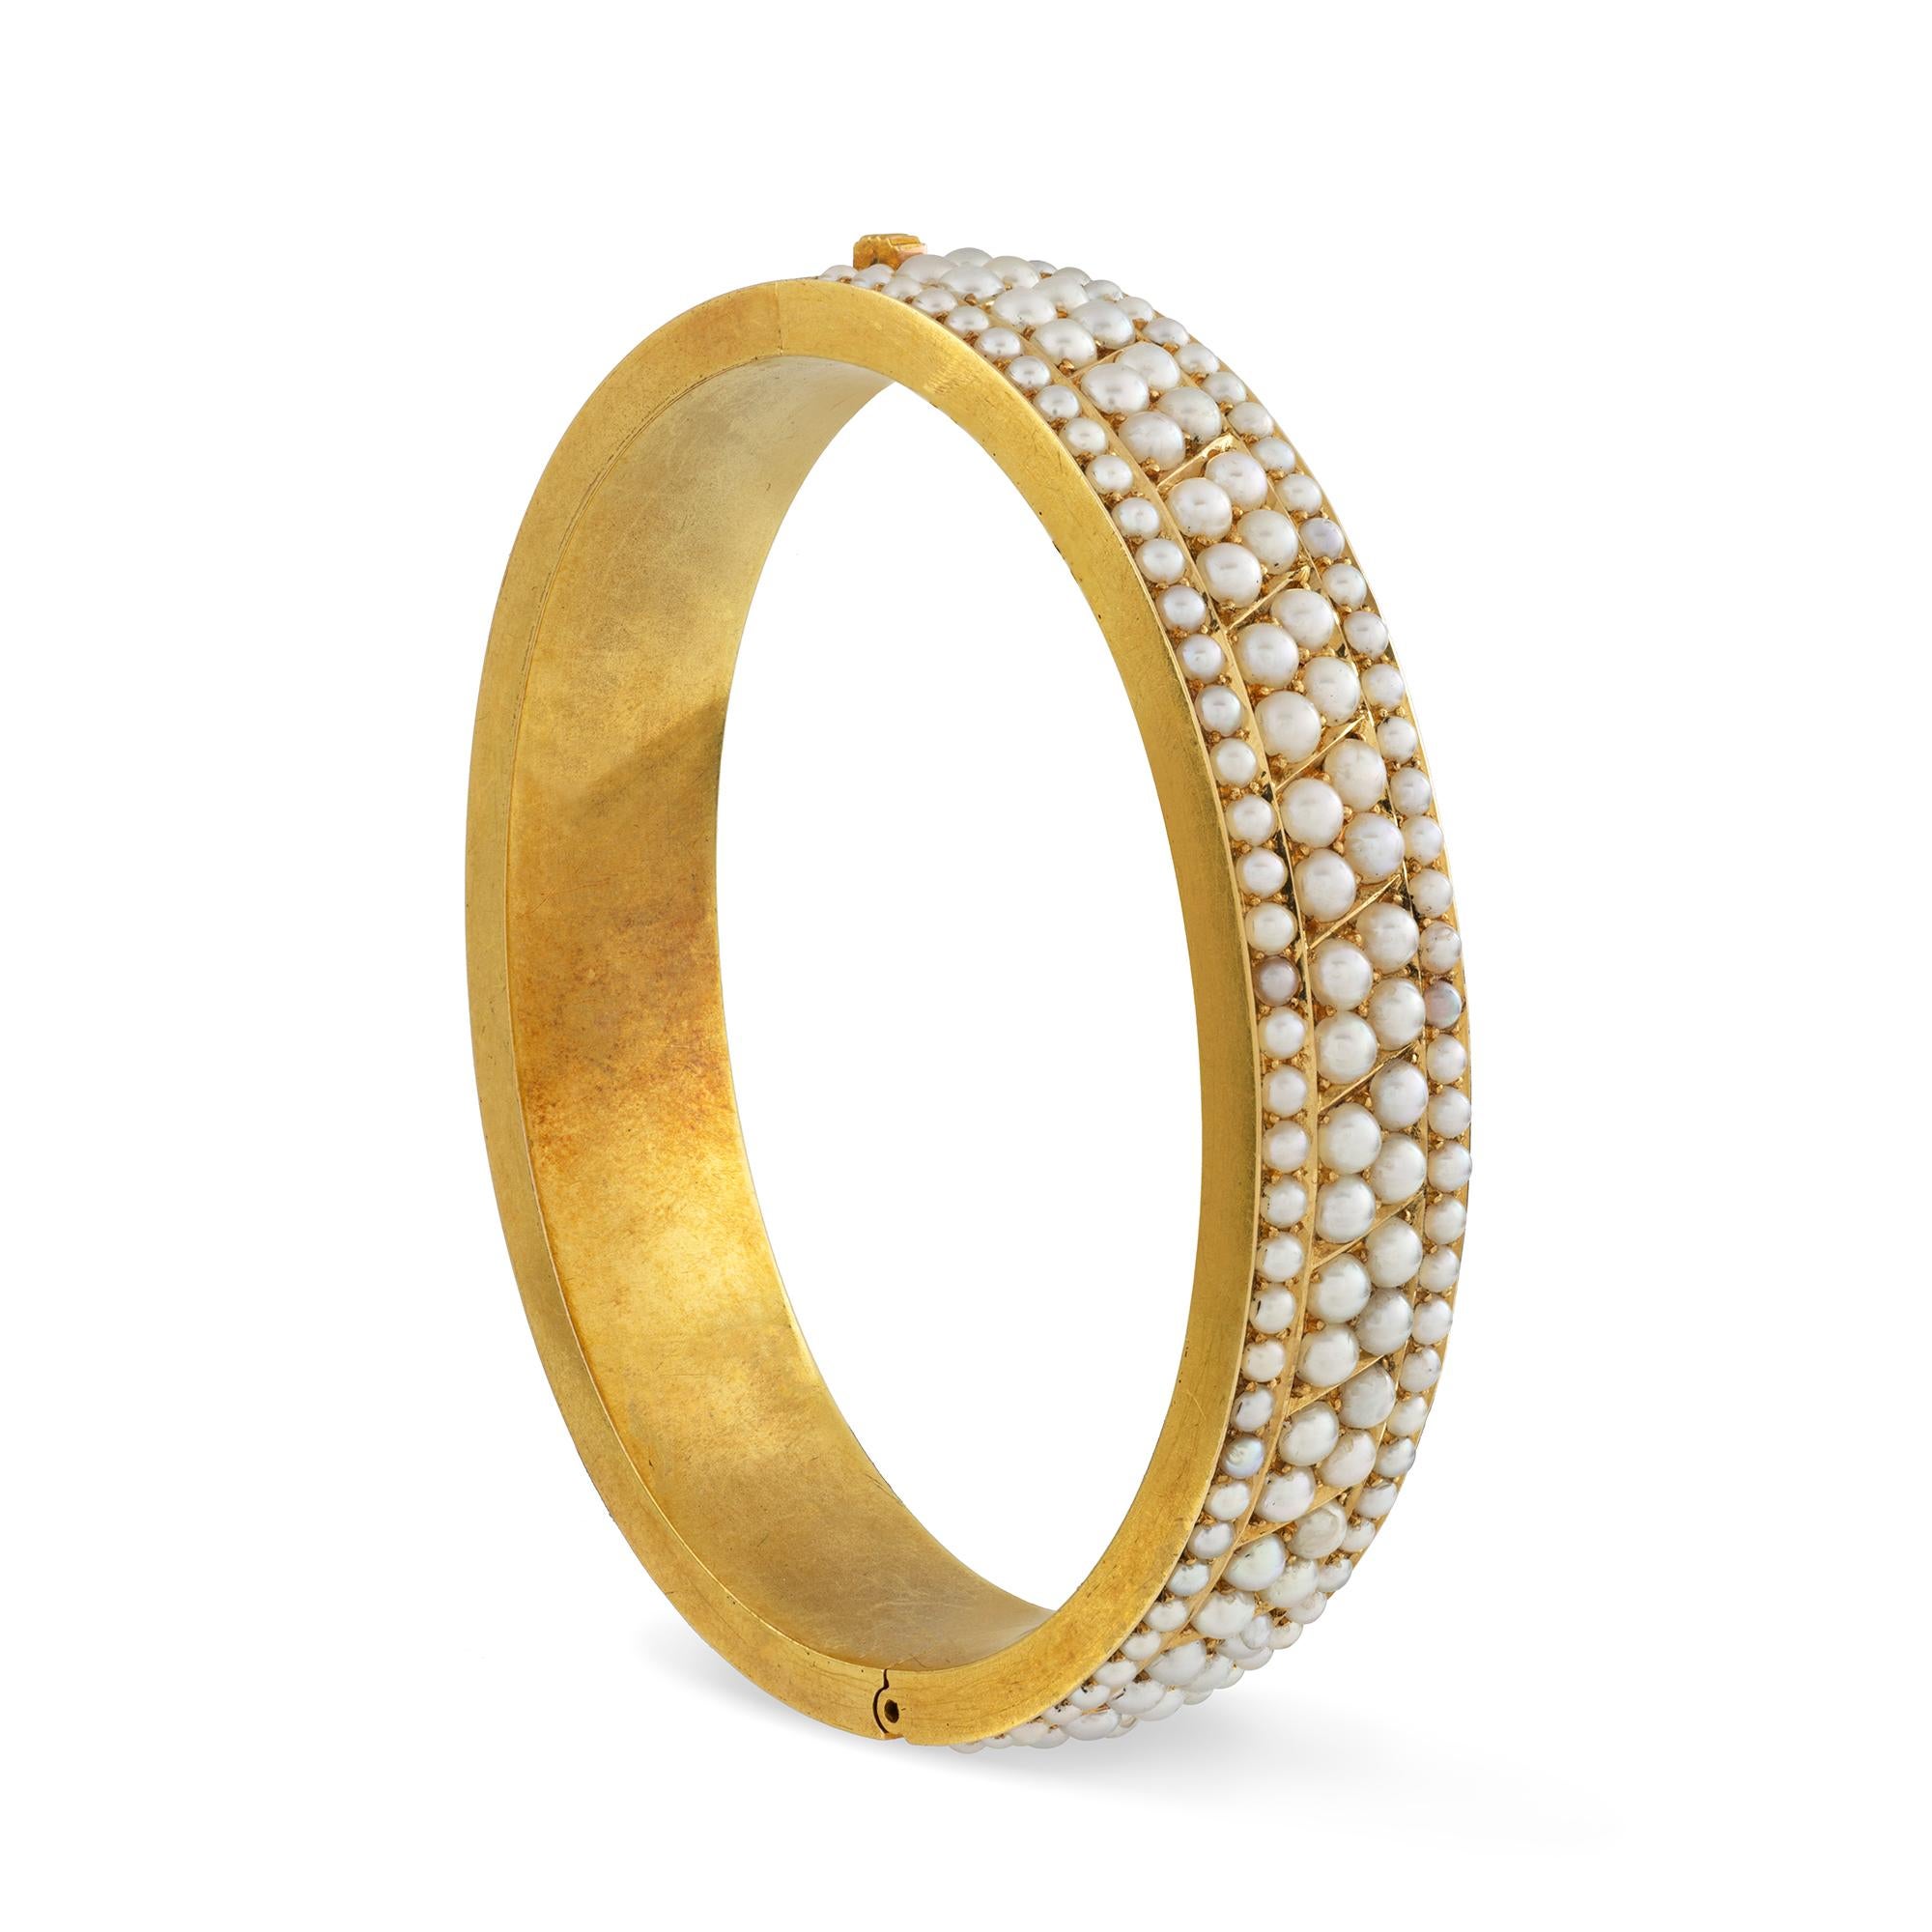 A Victorian half-pearl hinged bangle, the front set with four rows of half pearls, the two central row of pearls measuring 3mm and the two outer rows of pearls measuring 2mm, the back of yellow gold with matt finish, with integral clasp and safety